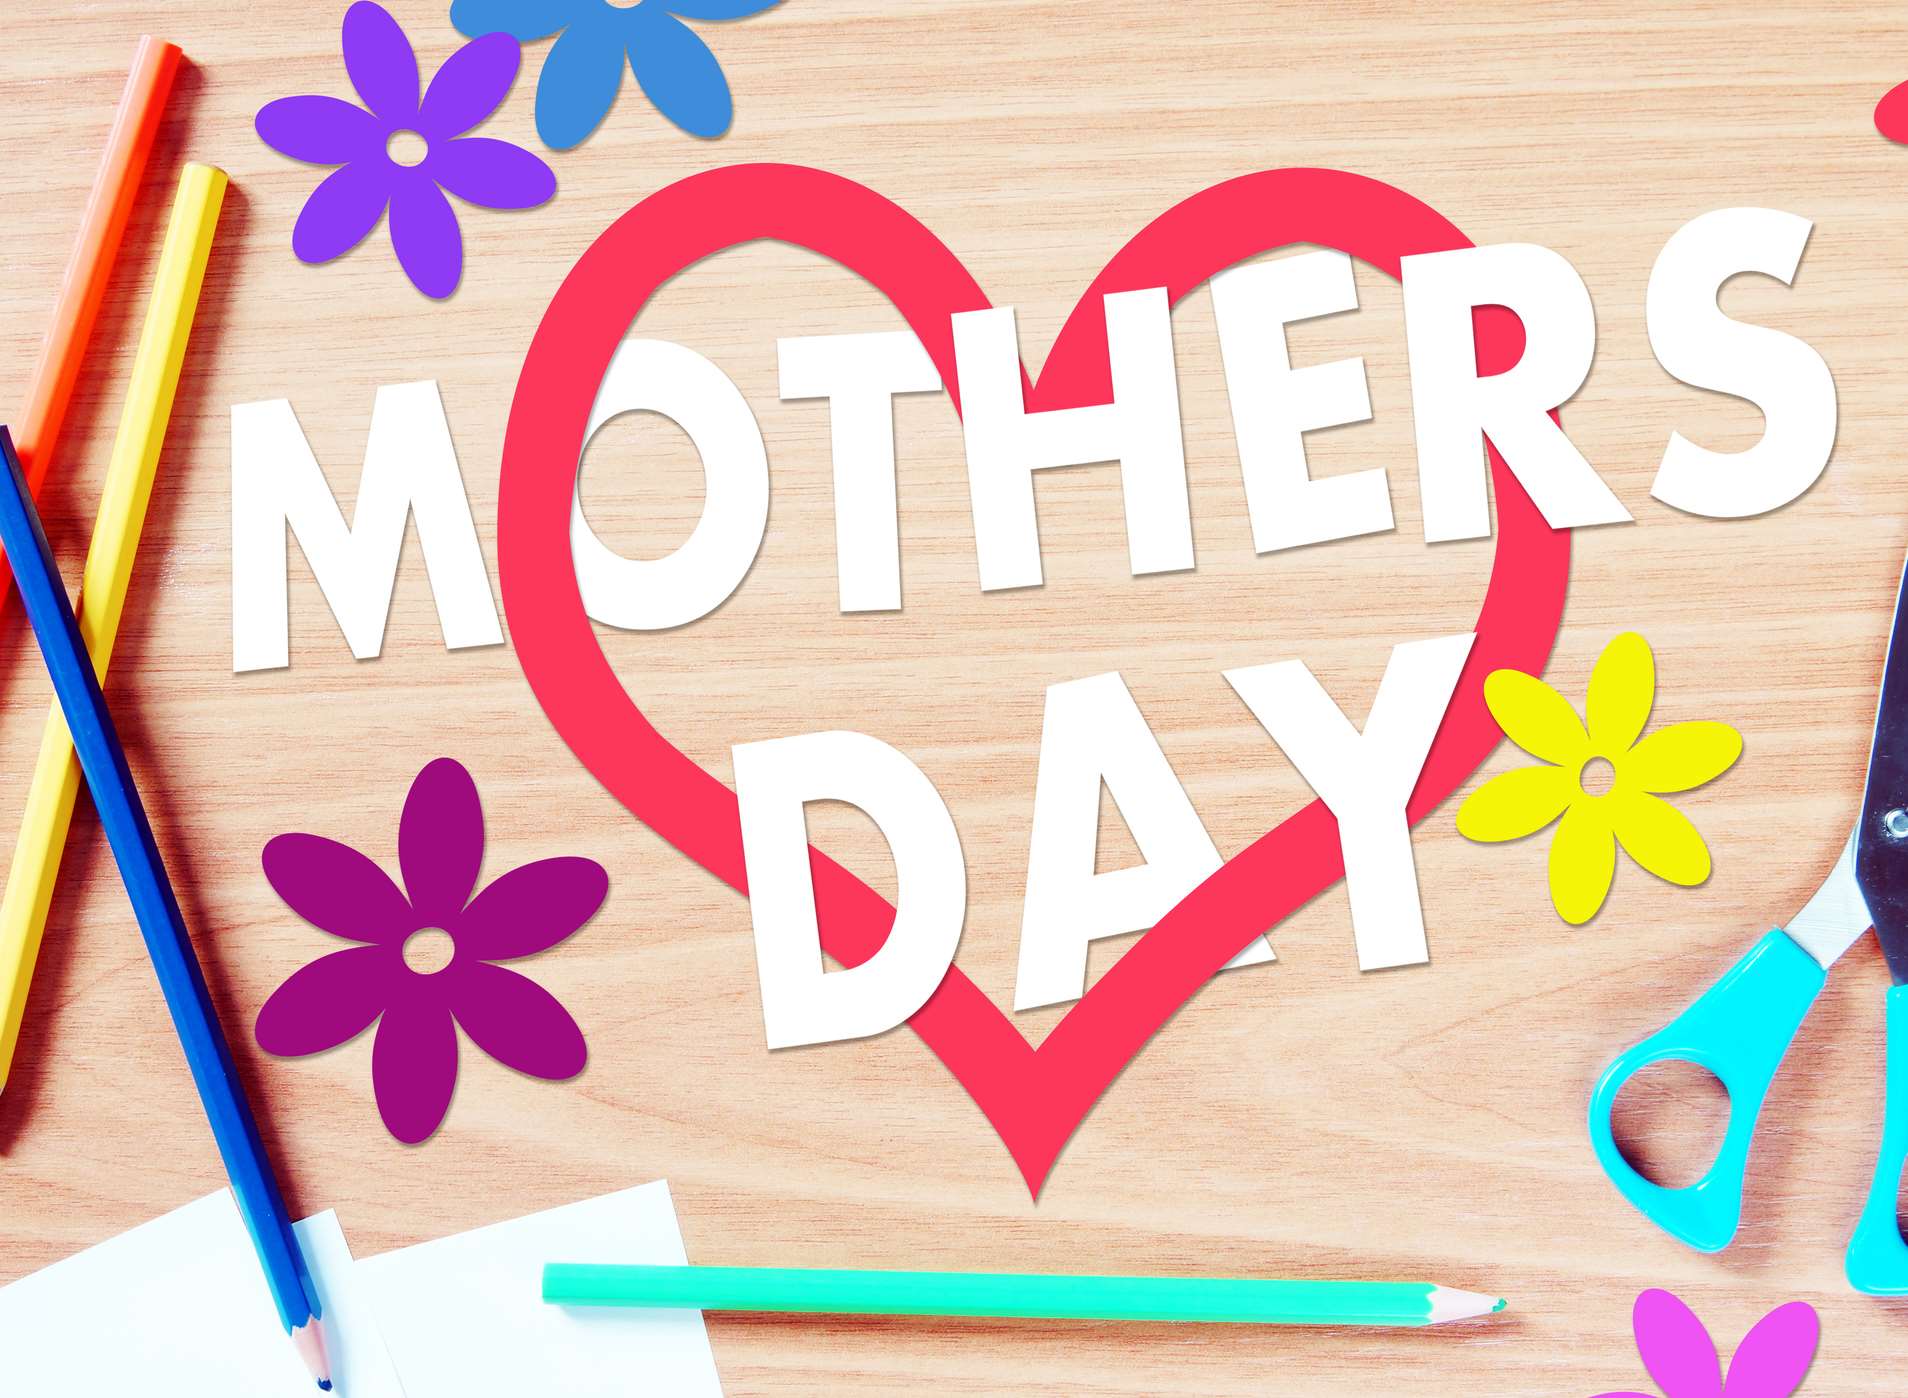 Mother's Day is on Sunday, March 26